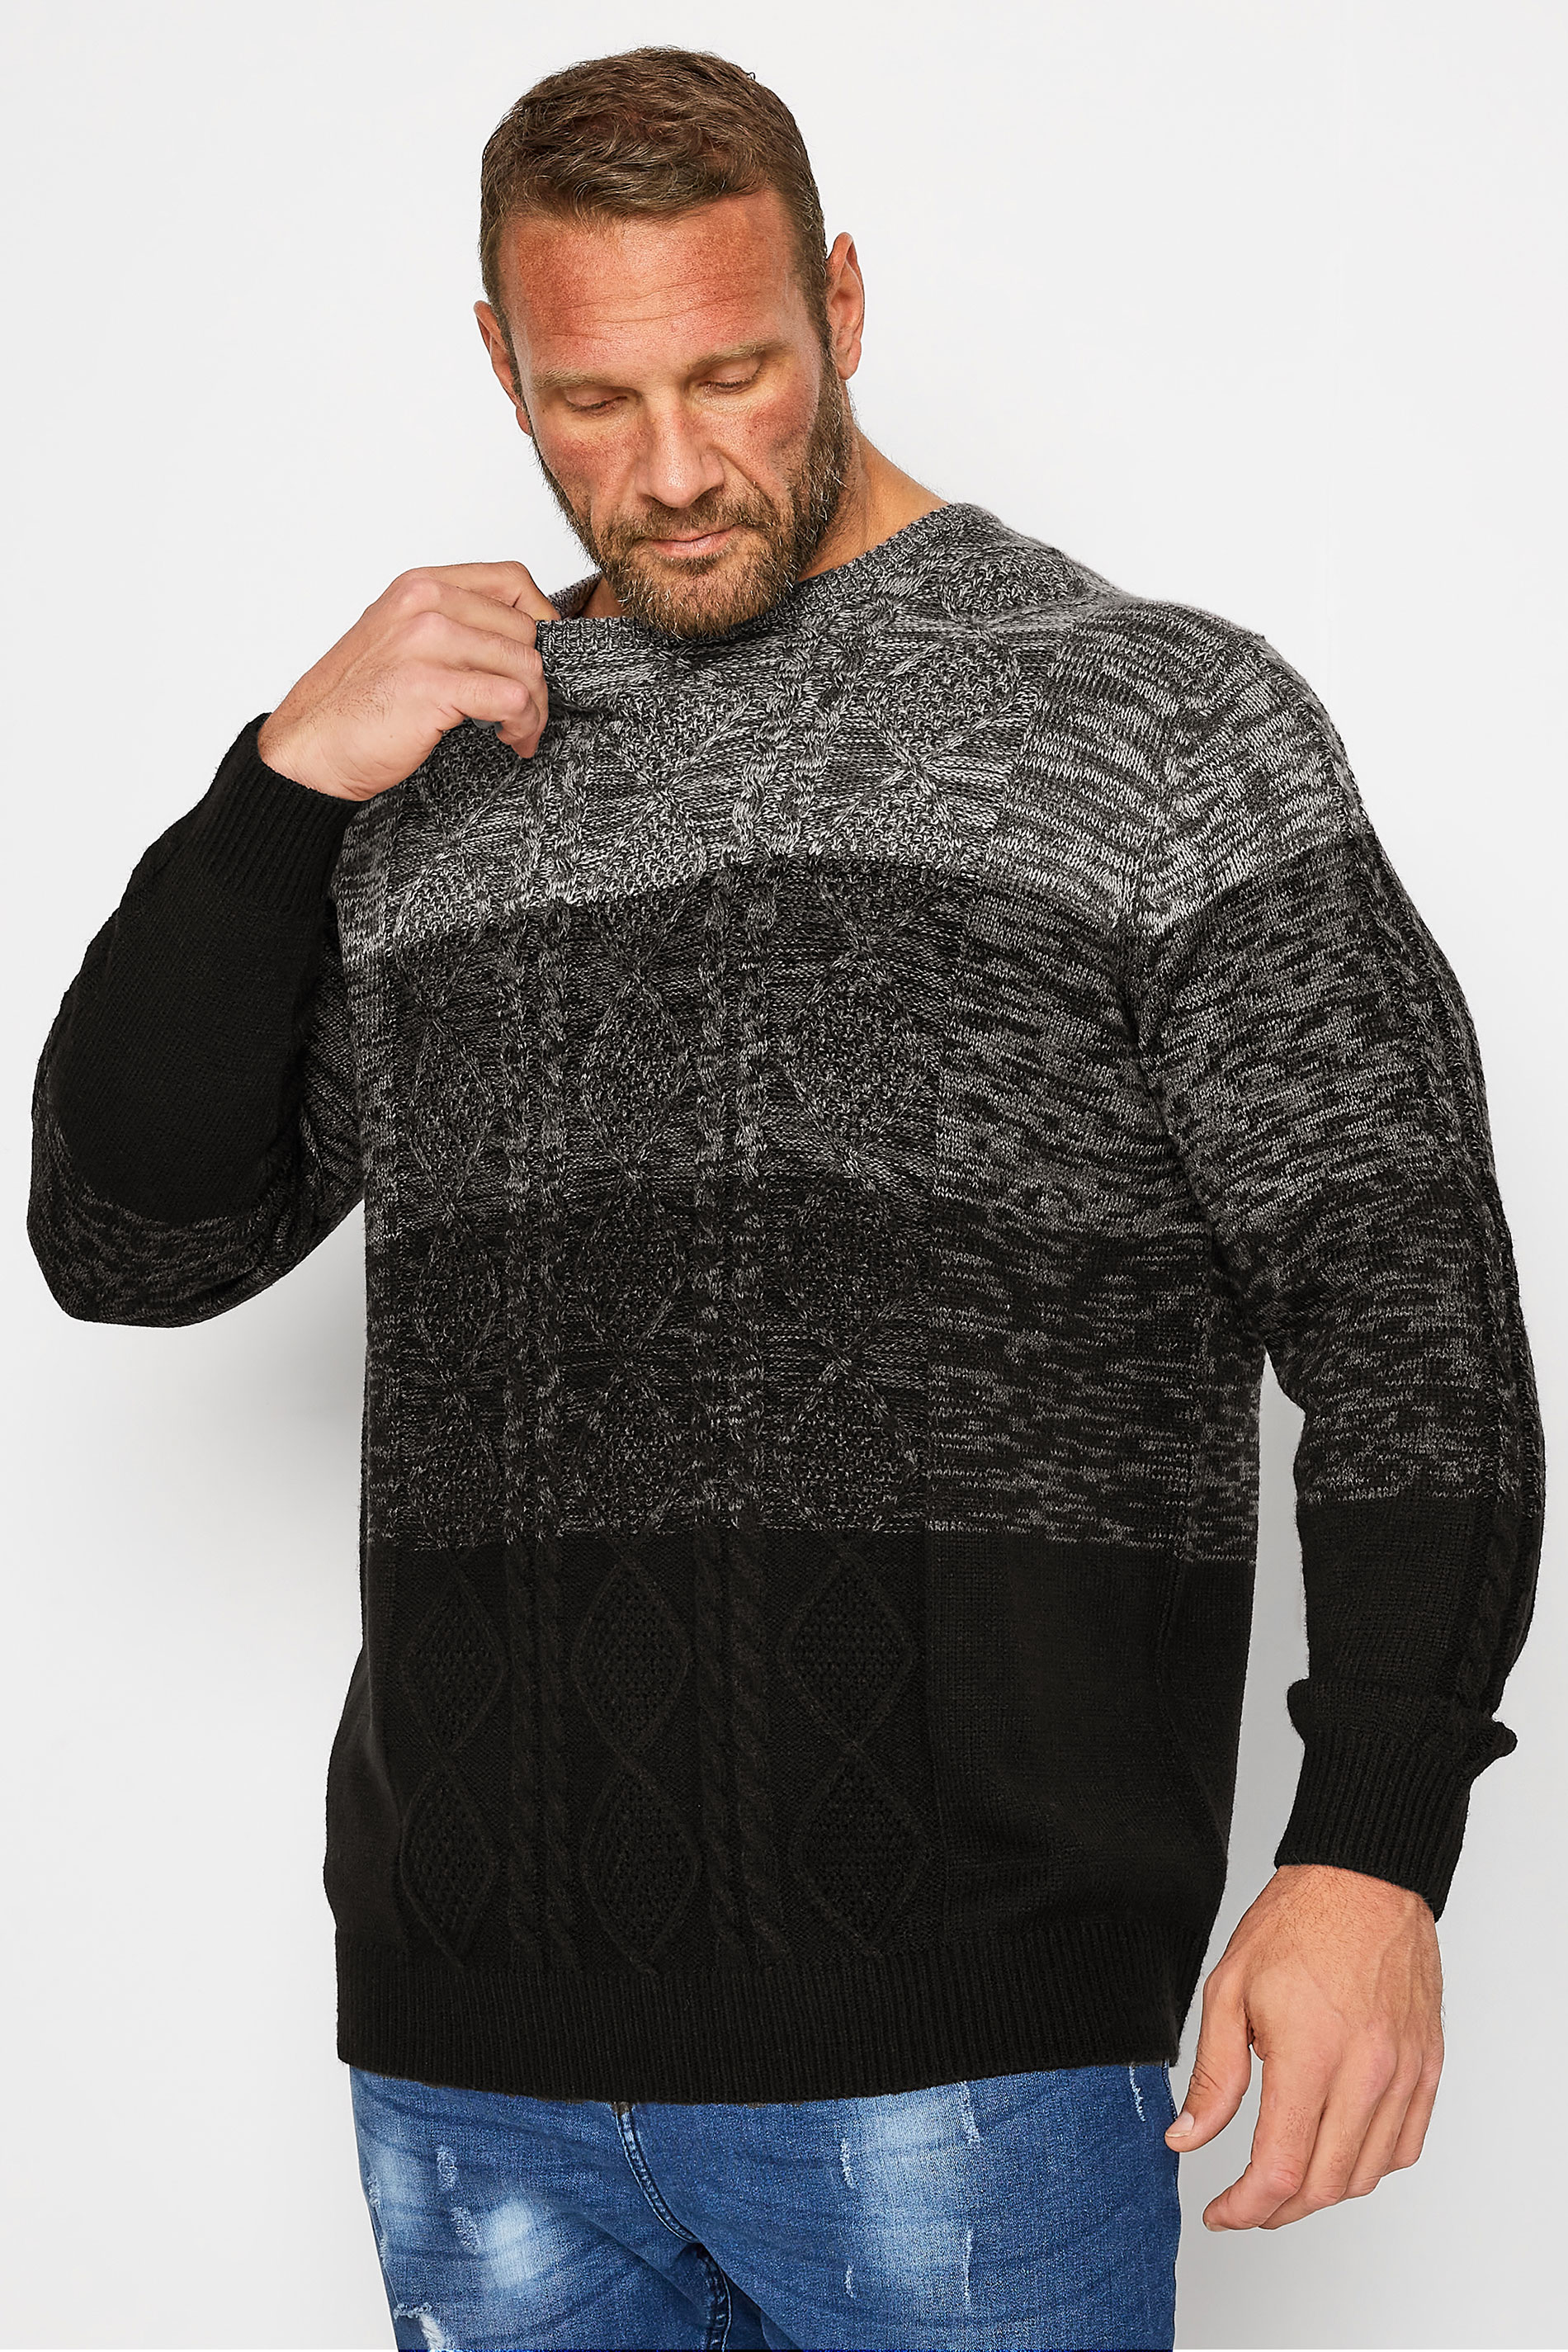 BadRhino Big & Tall Grey Colour Block Cable Knitted Jumper | BadRhino 1